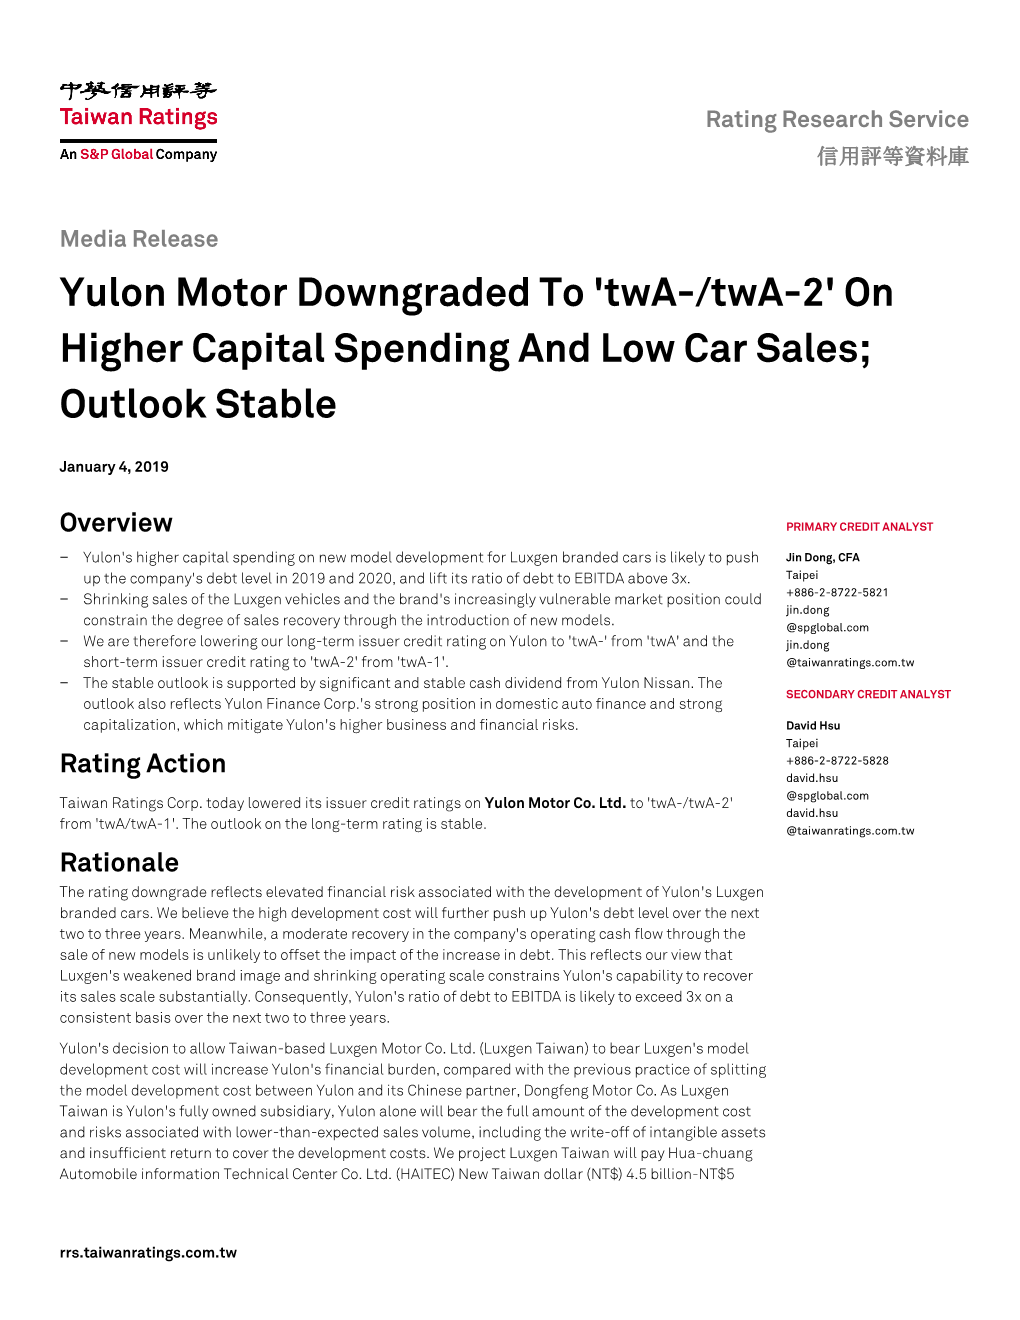 Yulon Motor Downgraded to 'Twa-/Twa-2' on Higher Capital Spending and Low Car Sales; Outlook Stable